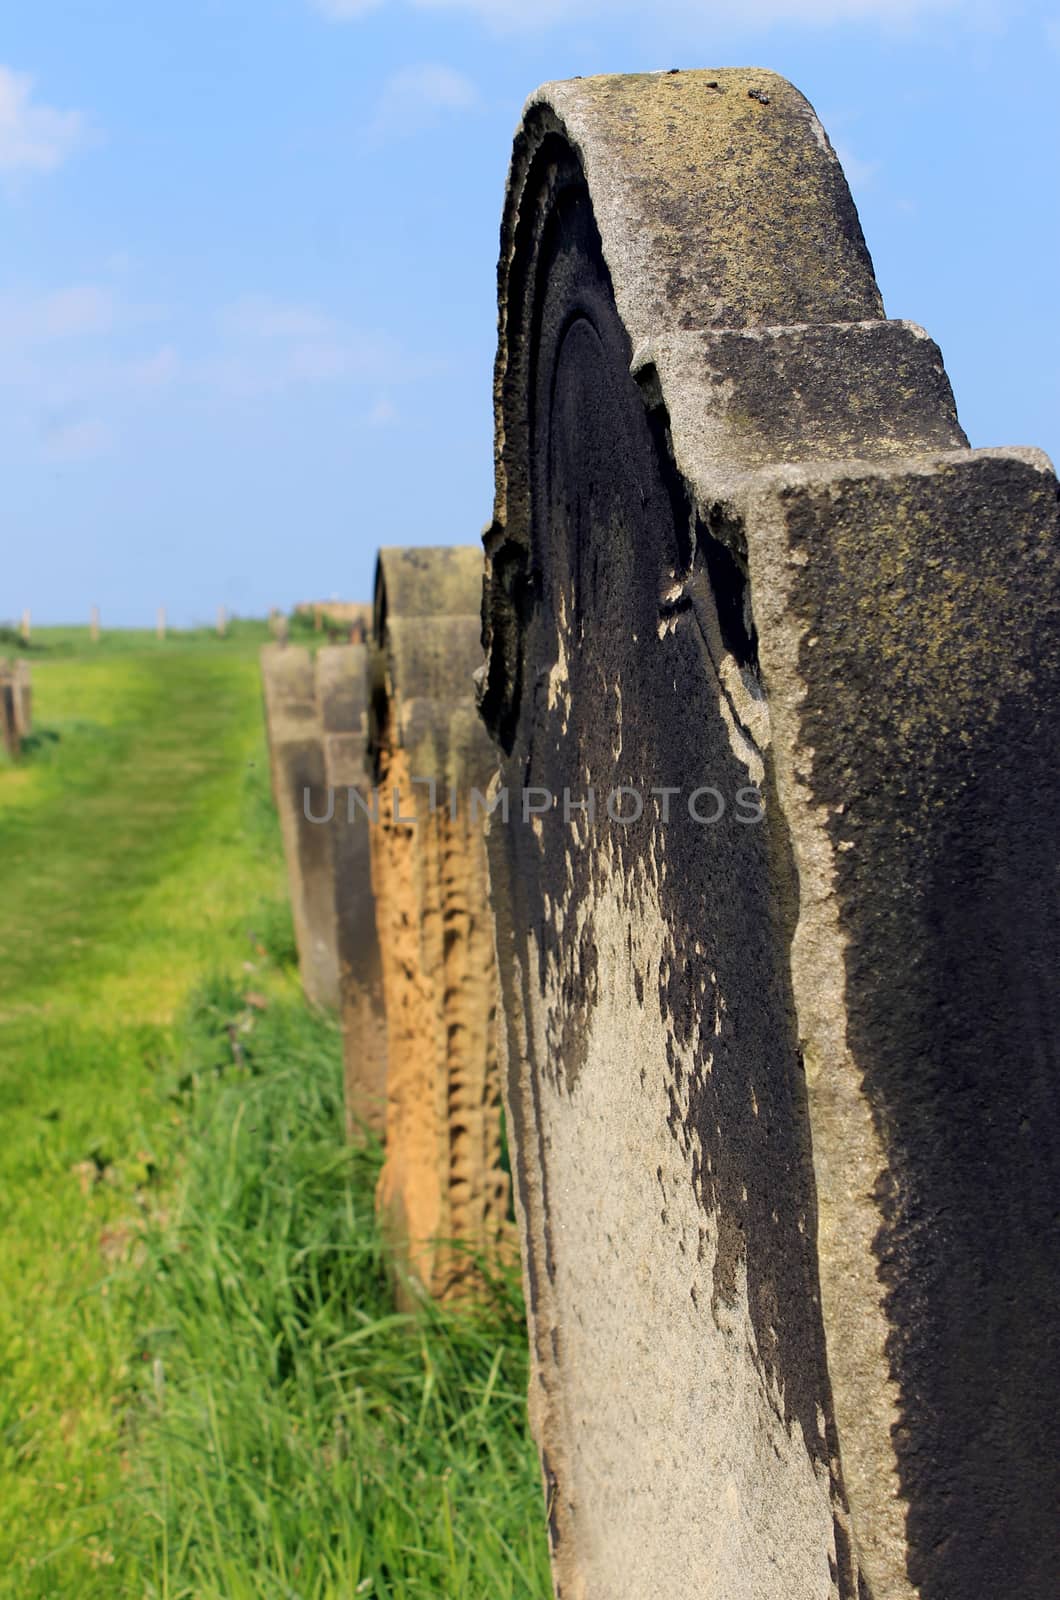 Scenic view of old gravestones in a rural cemetery with the focus on the stone in the foreground.